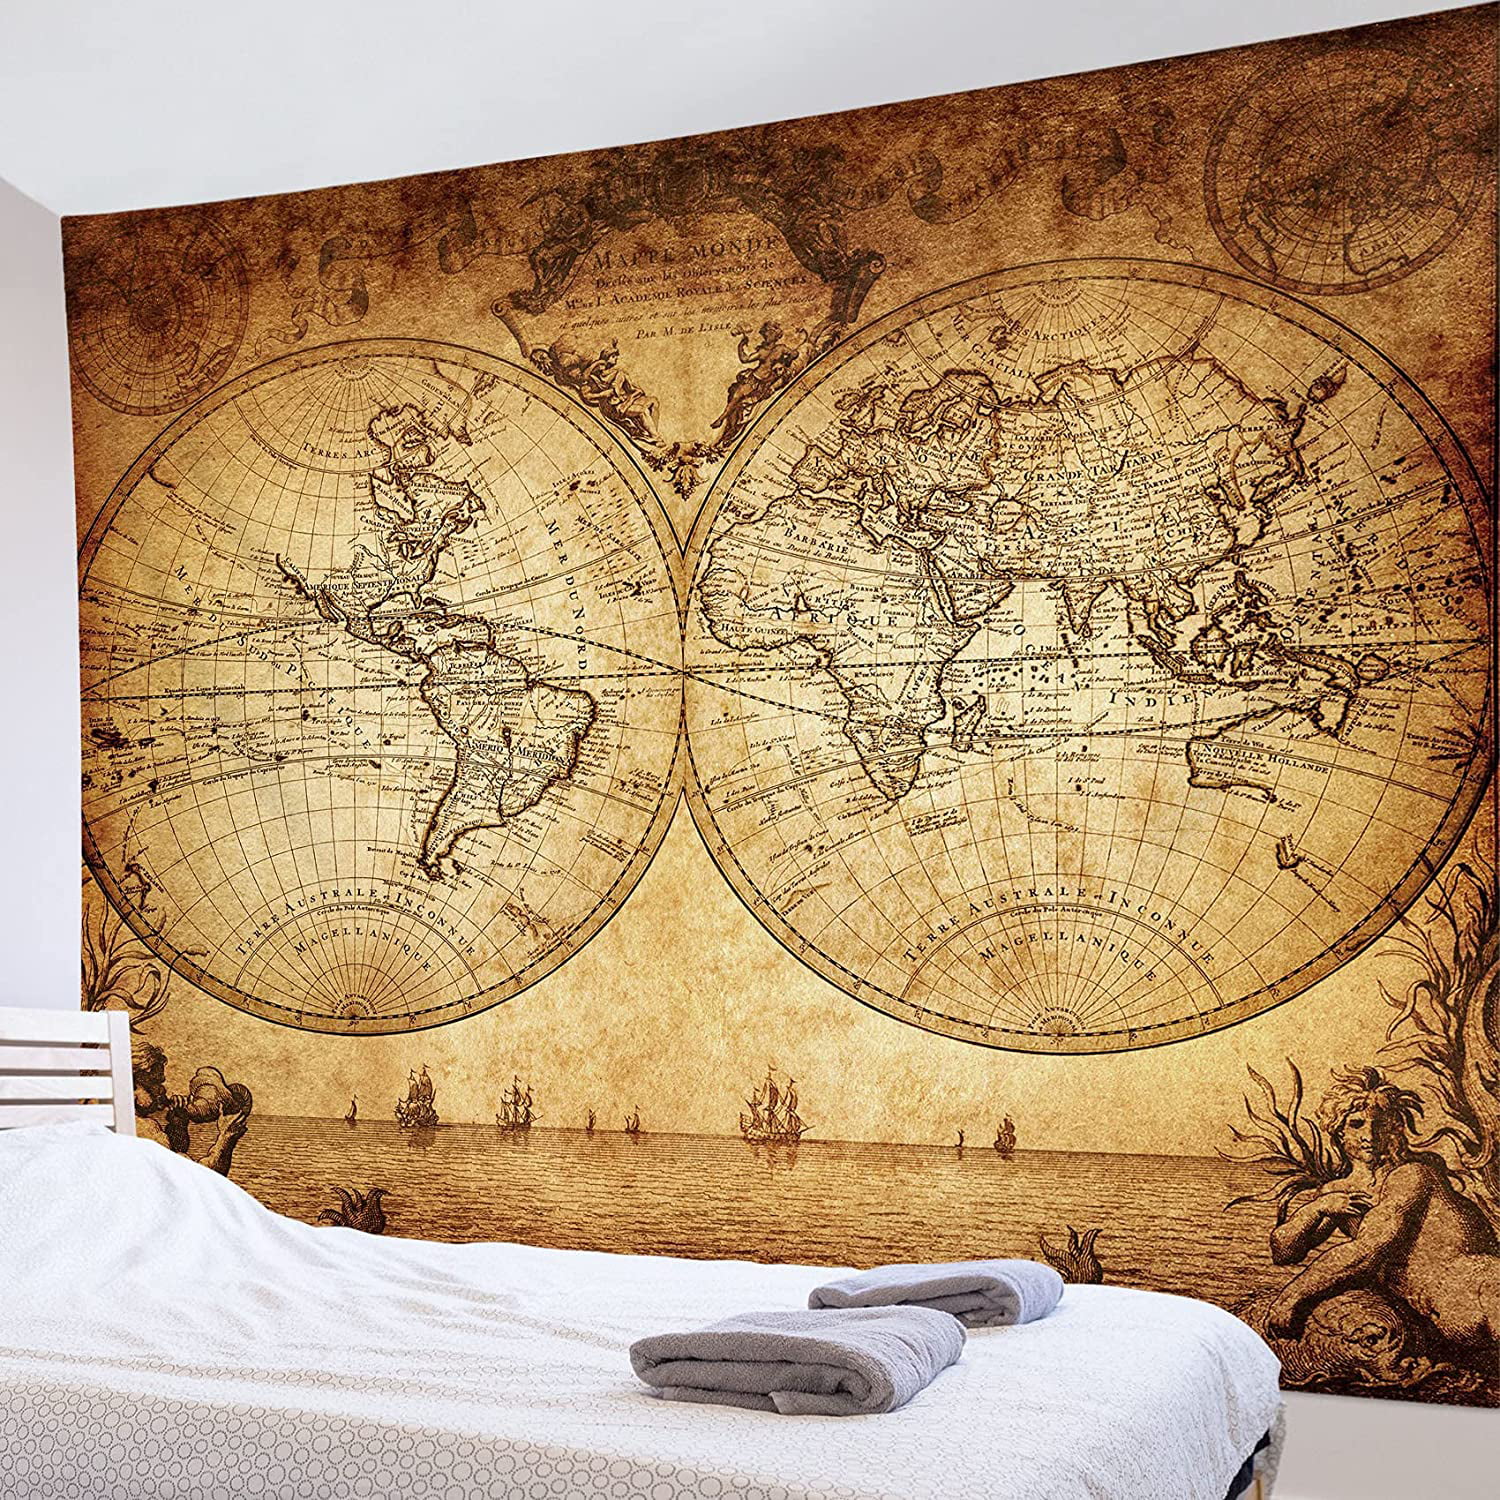 Antique World Map Wall Tapestry Hanging Polyester Fabric Bedroom Dorm Art Decor 